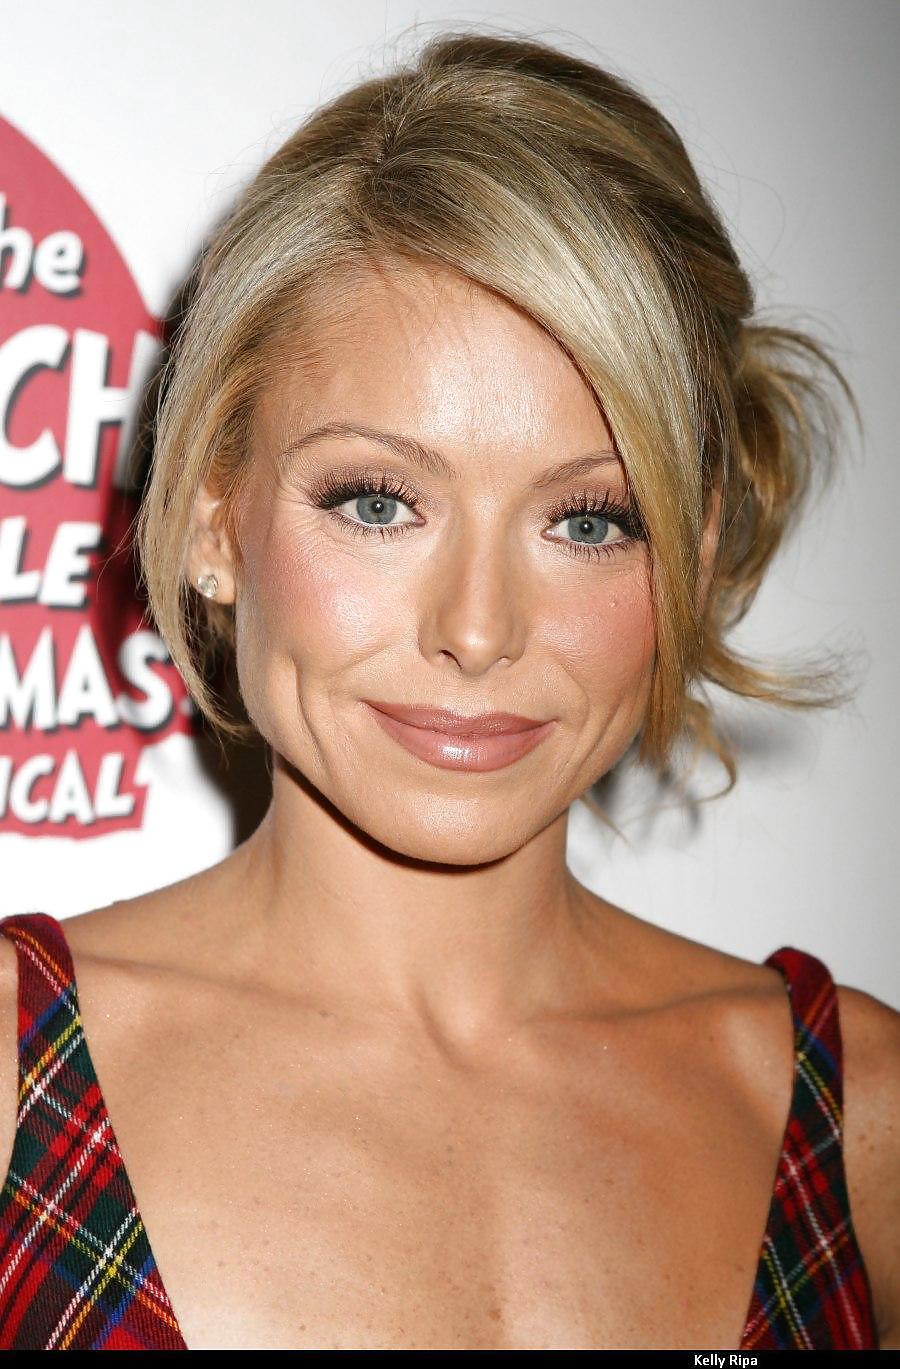 Kelly Ripa Ultimate Collection #8487973